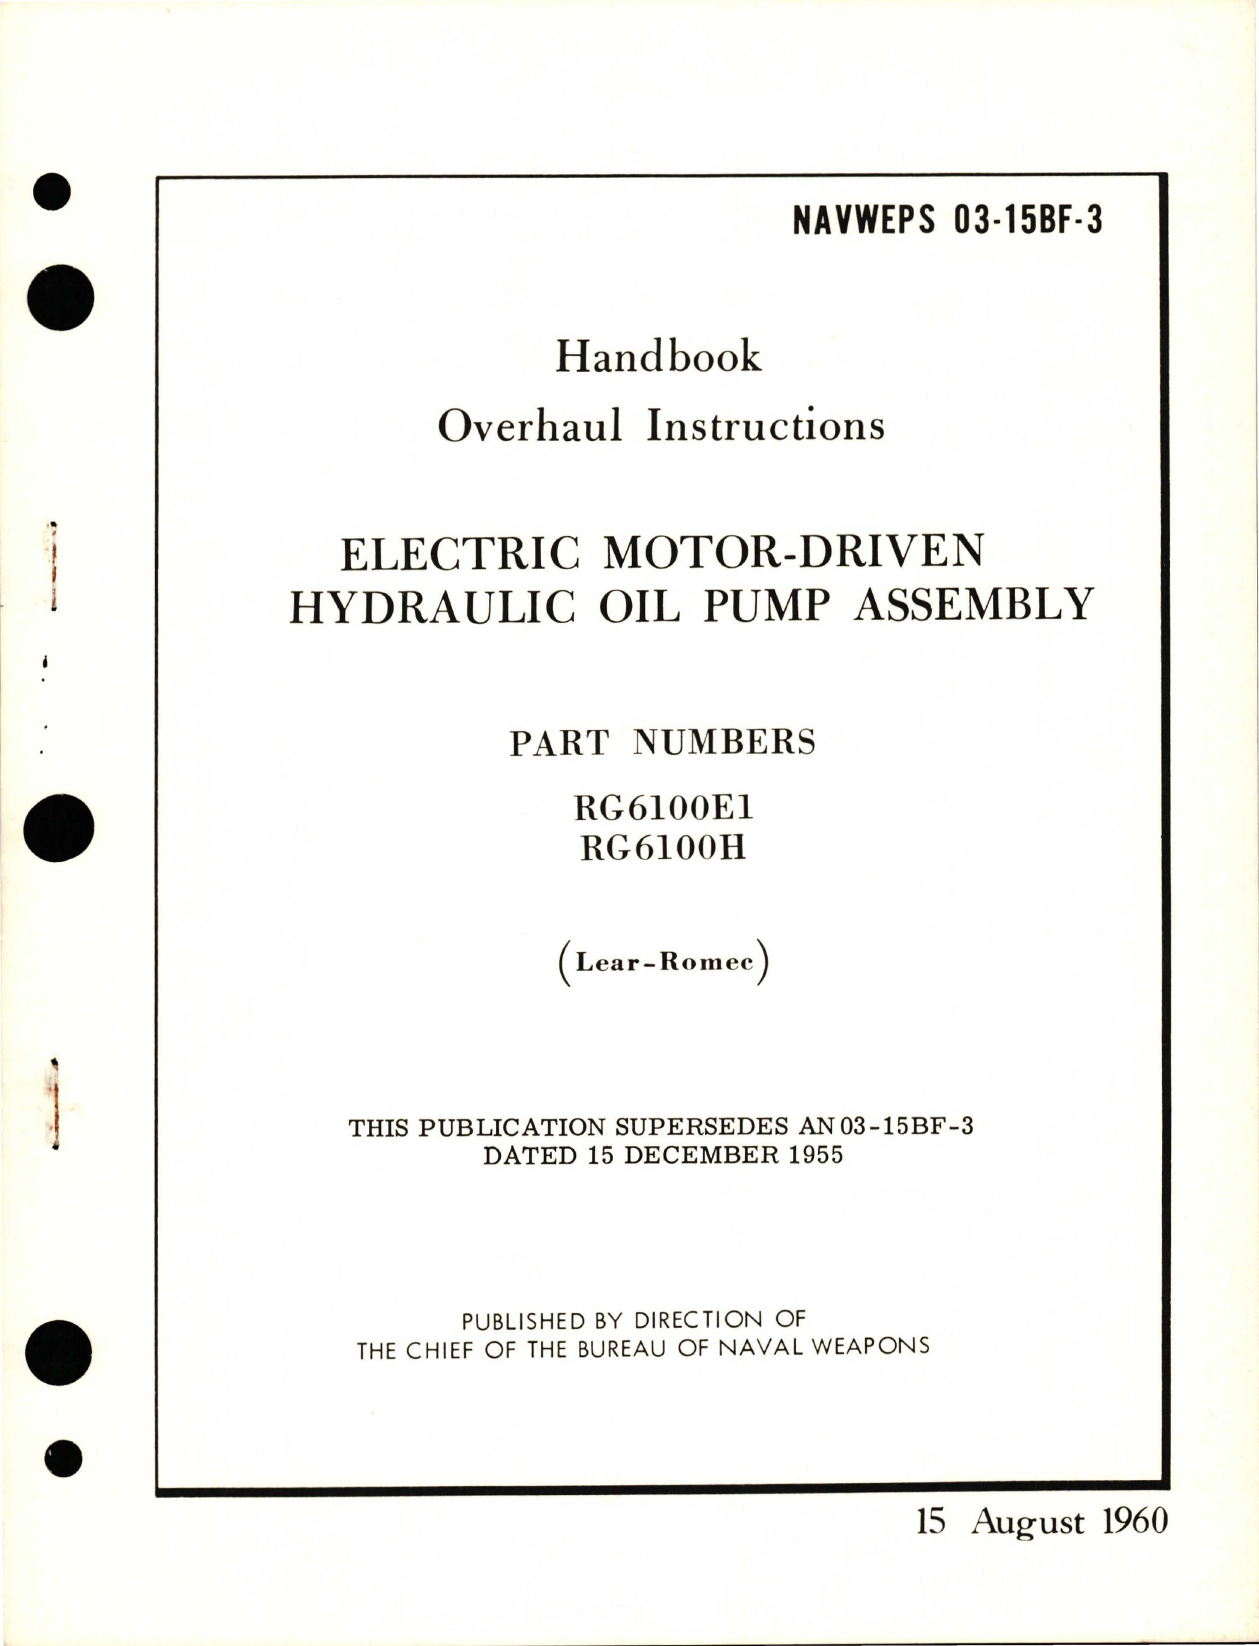 Sample page 1 from AirCorps Library document: Overhaul Instructions for Electric Motor-Driven Hydraulic Oil Pump Assembly - Parts RG6100E1 and RG6100H